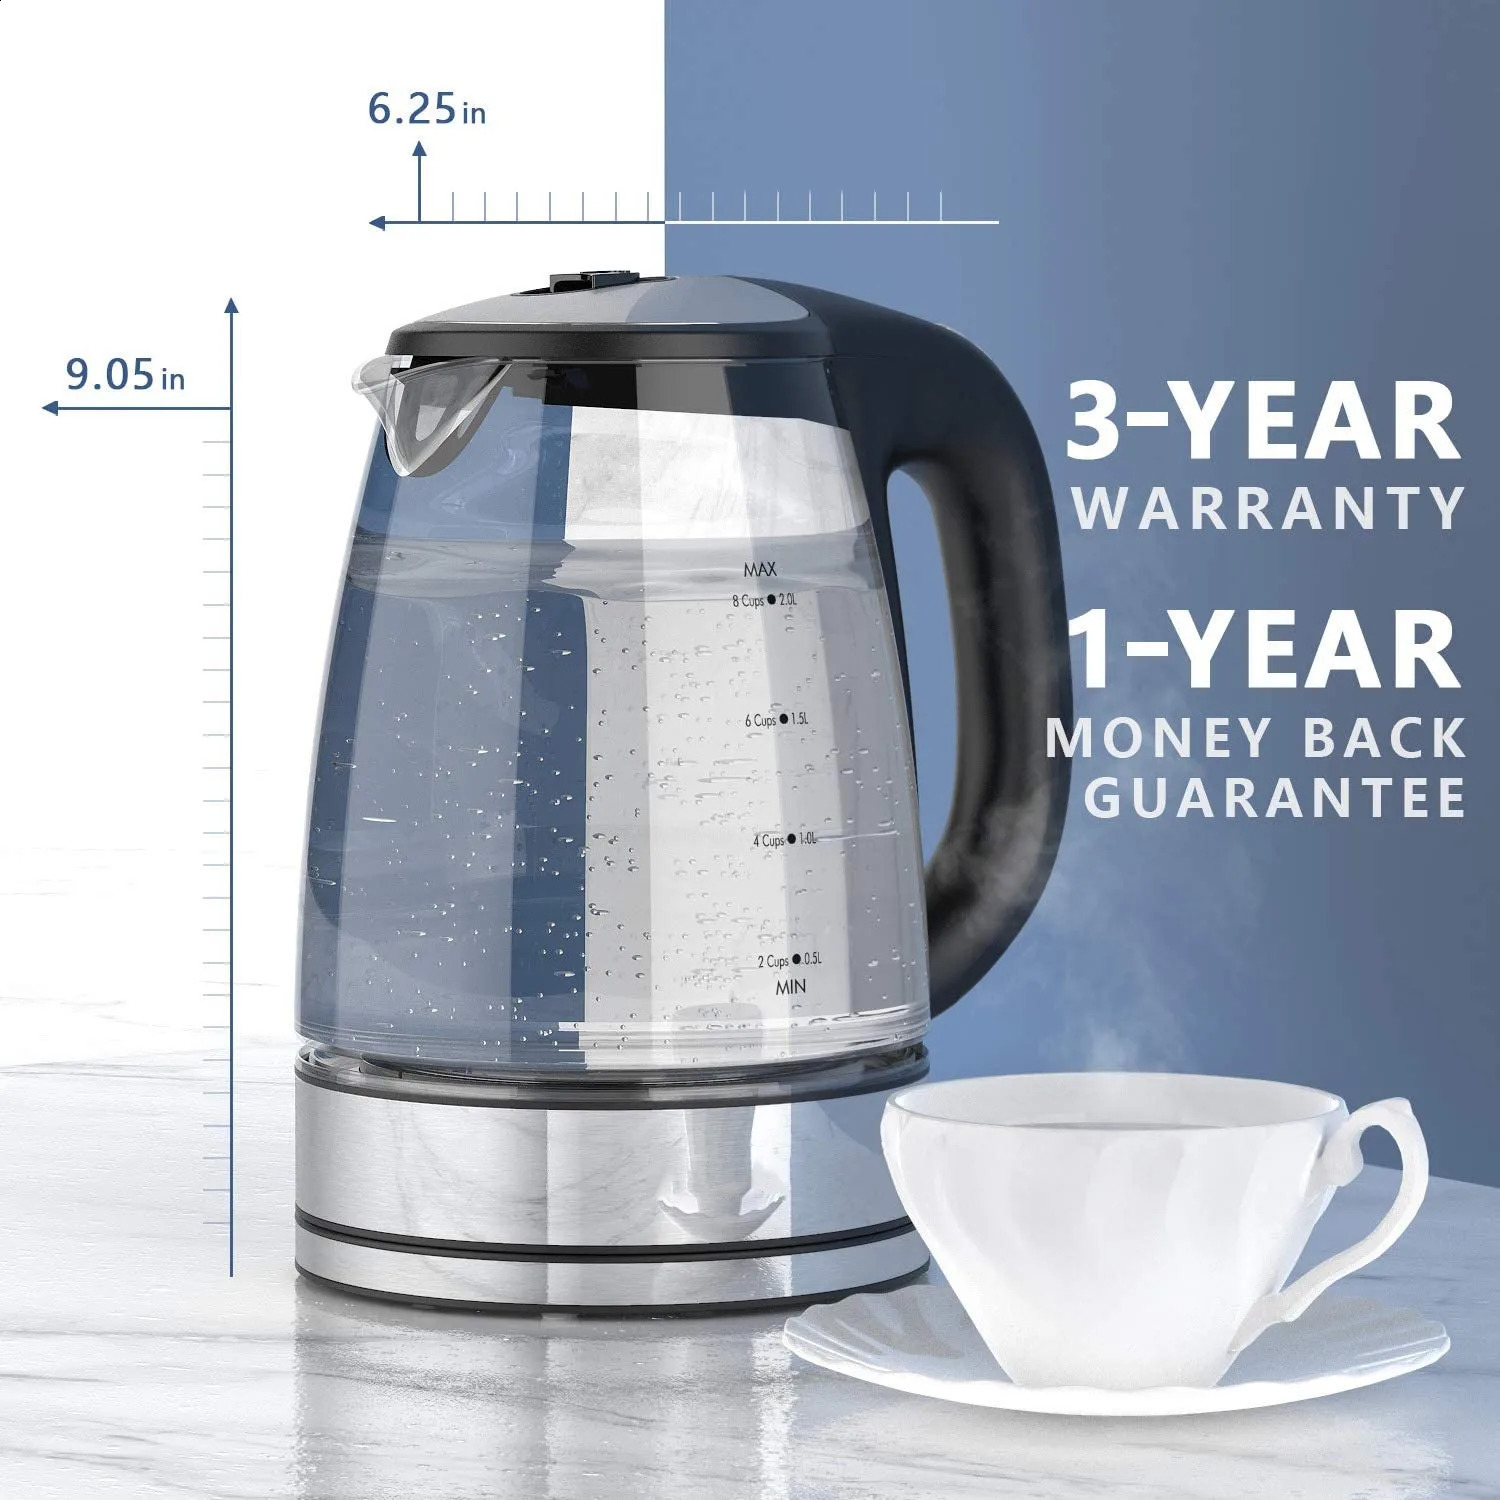 Water Bottles DEVISIB Electric Kettle Temperature Control 4Hours Keep Warm 2L Glass Tea Coffee Boiler Food Grade 304 Stainless Steel 231109